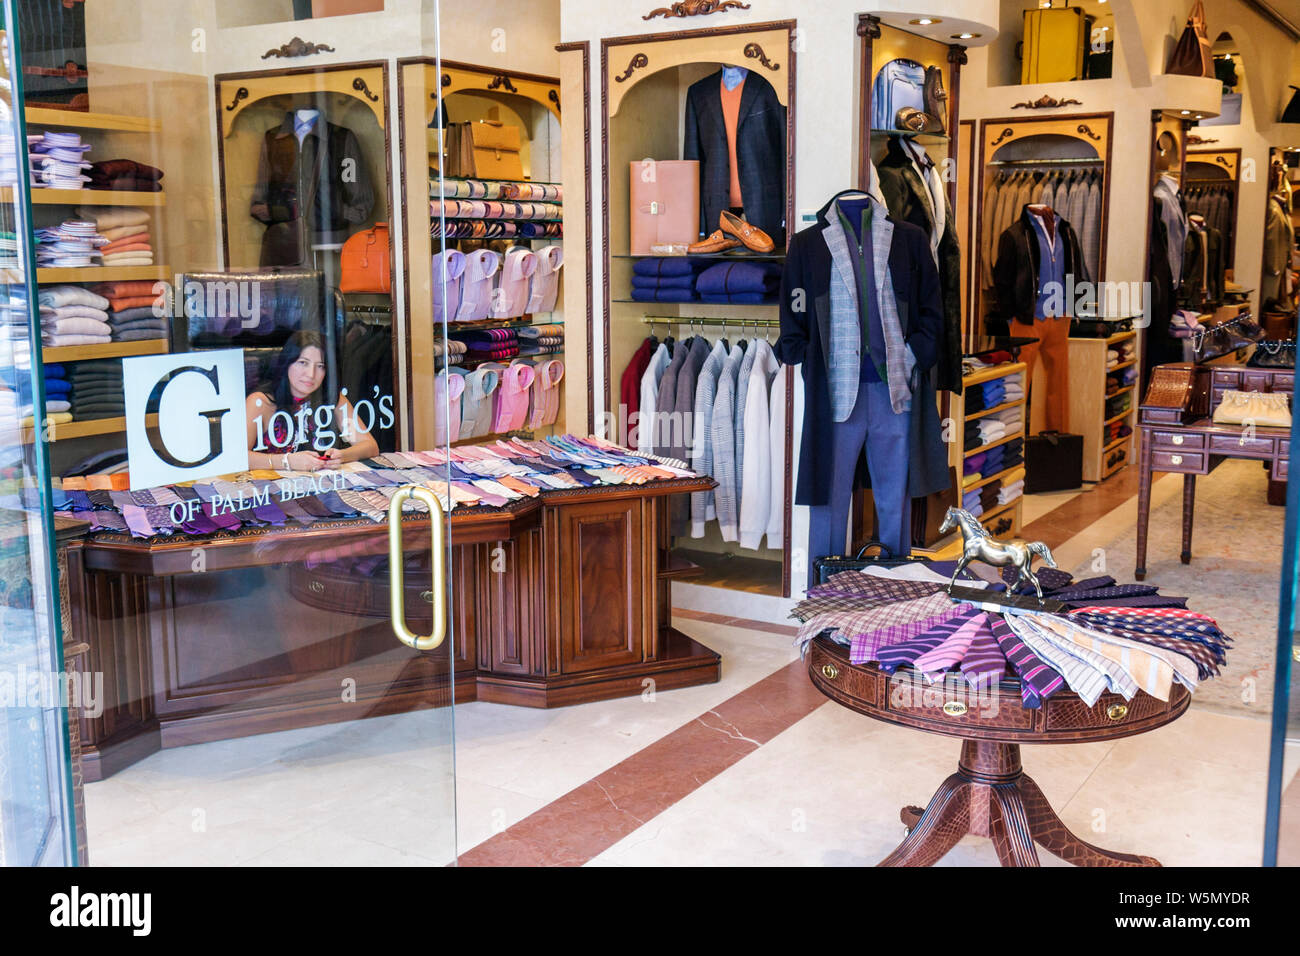 GR42 Luxury Men's Clothes Store Display Ideas_